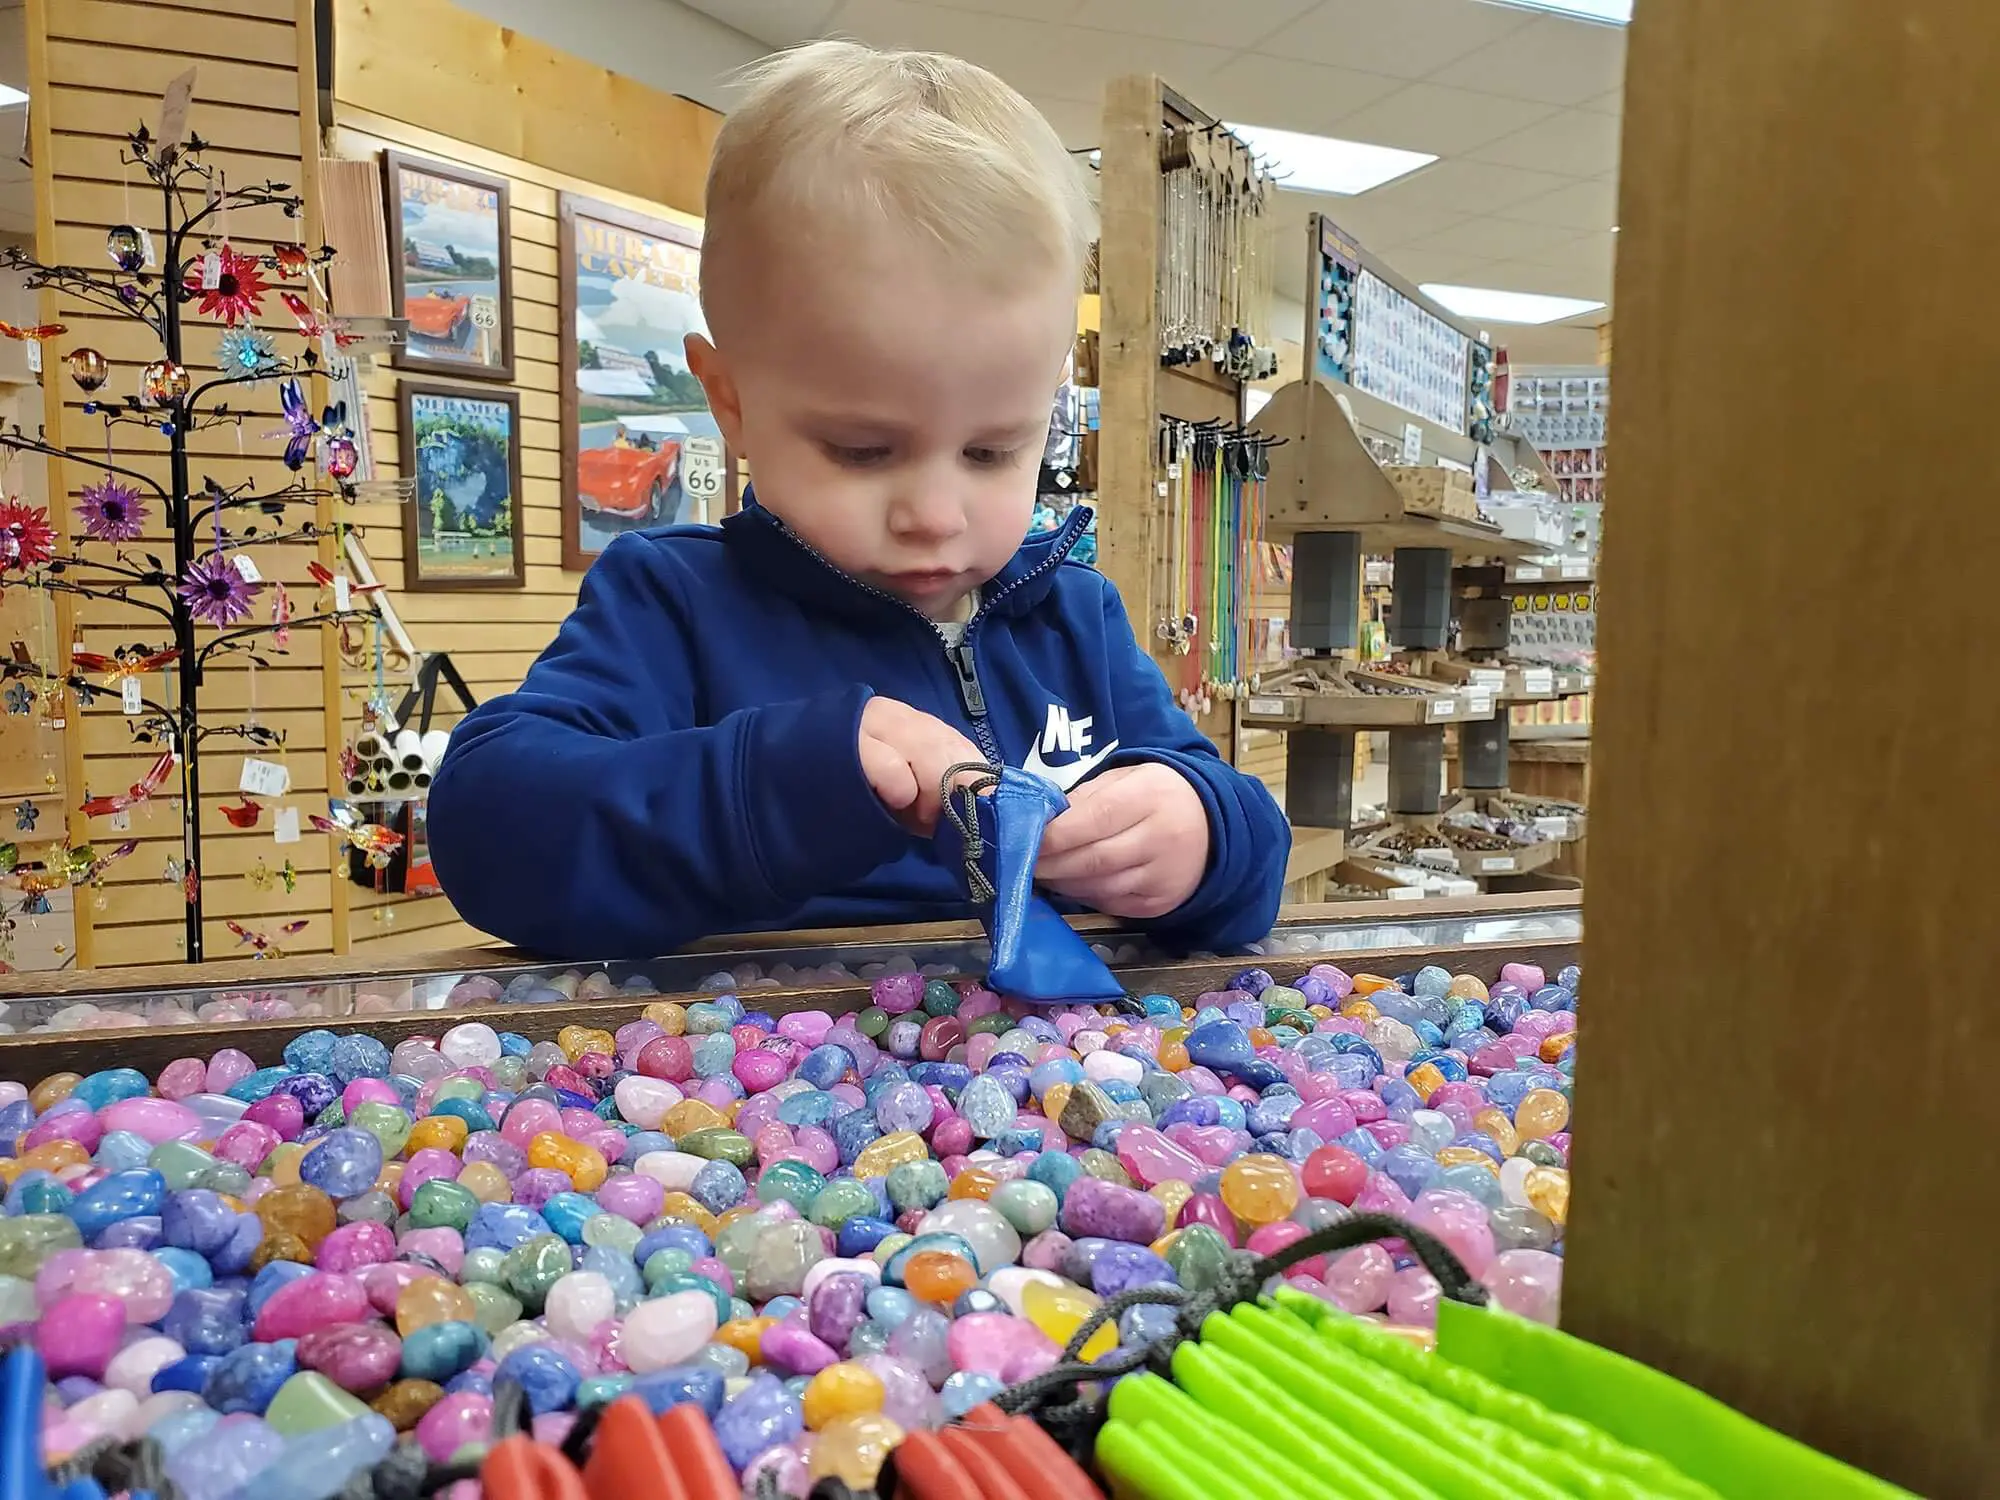 Young boy playing with rocks at the Meramec Caverns gift shop